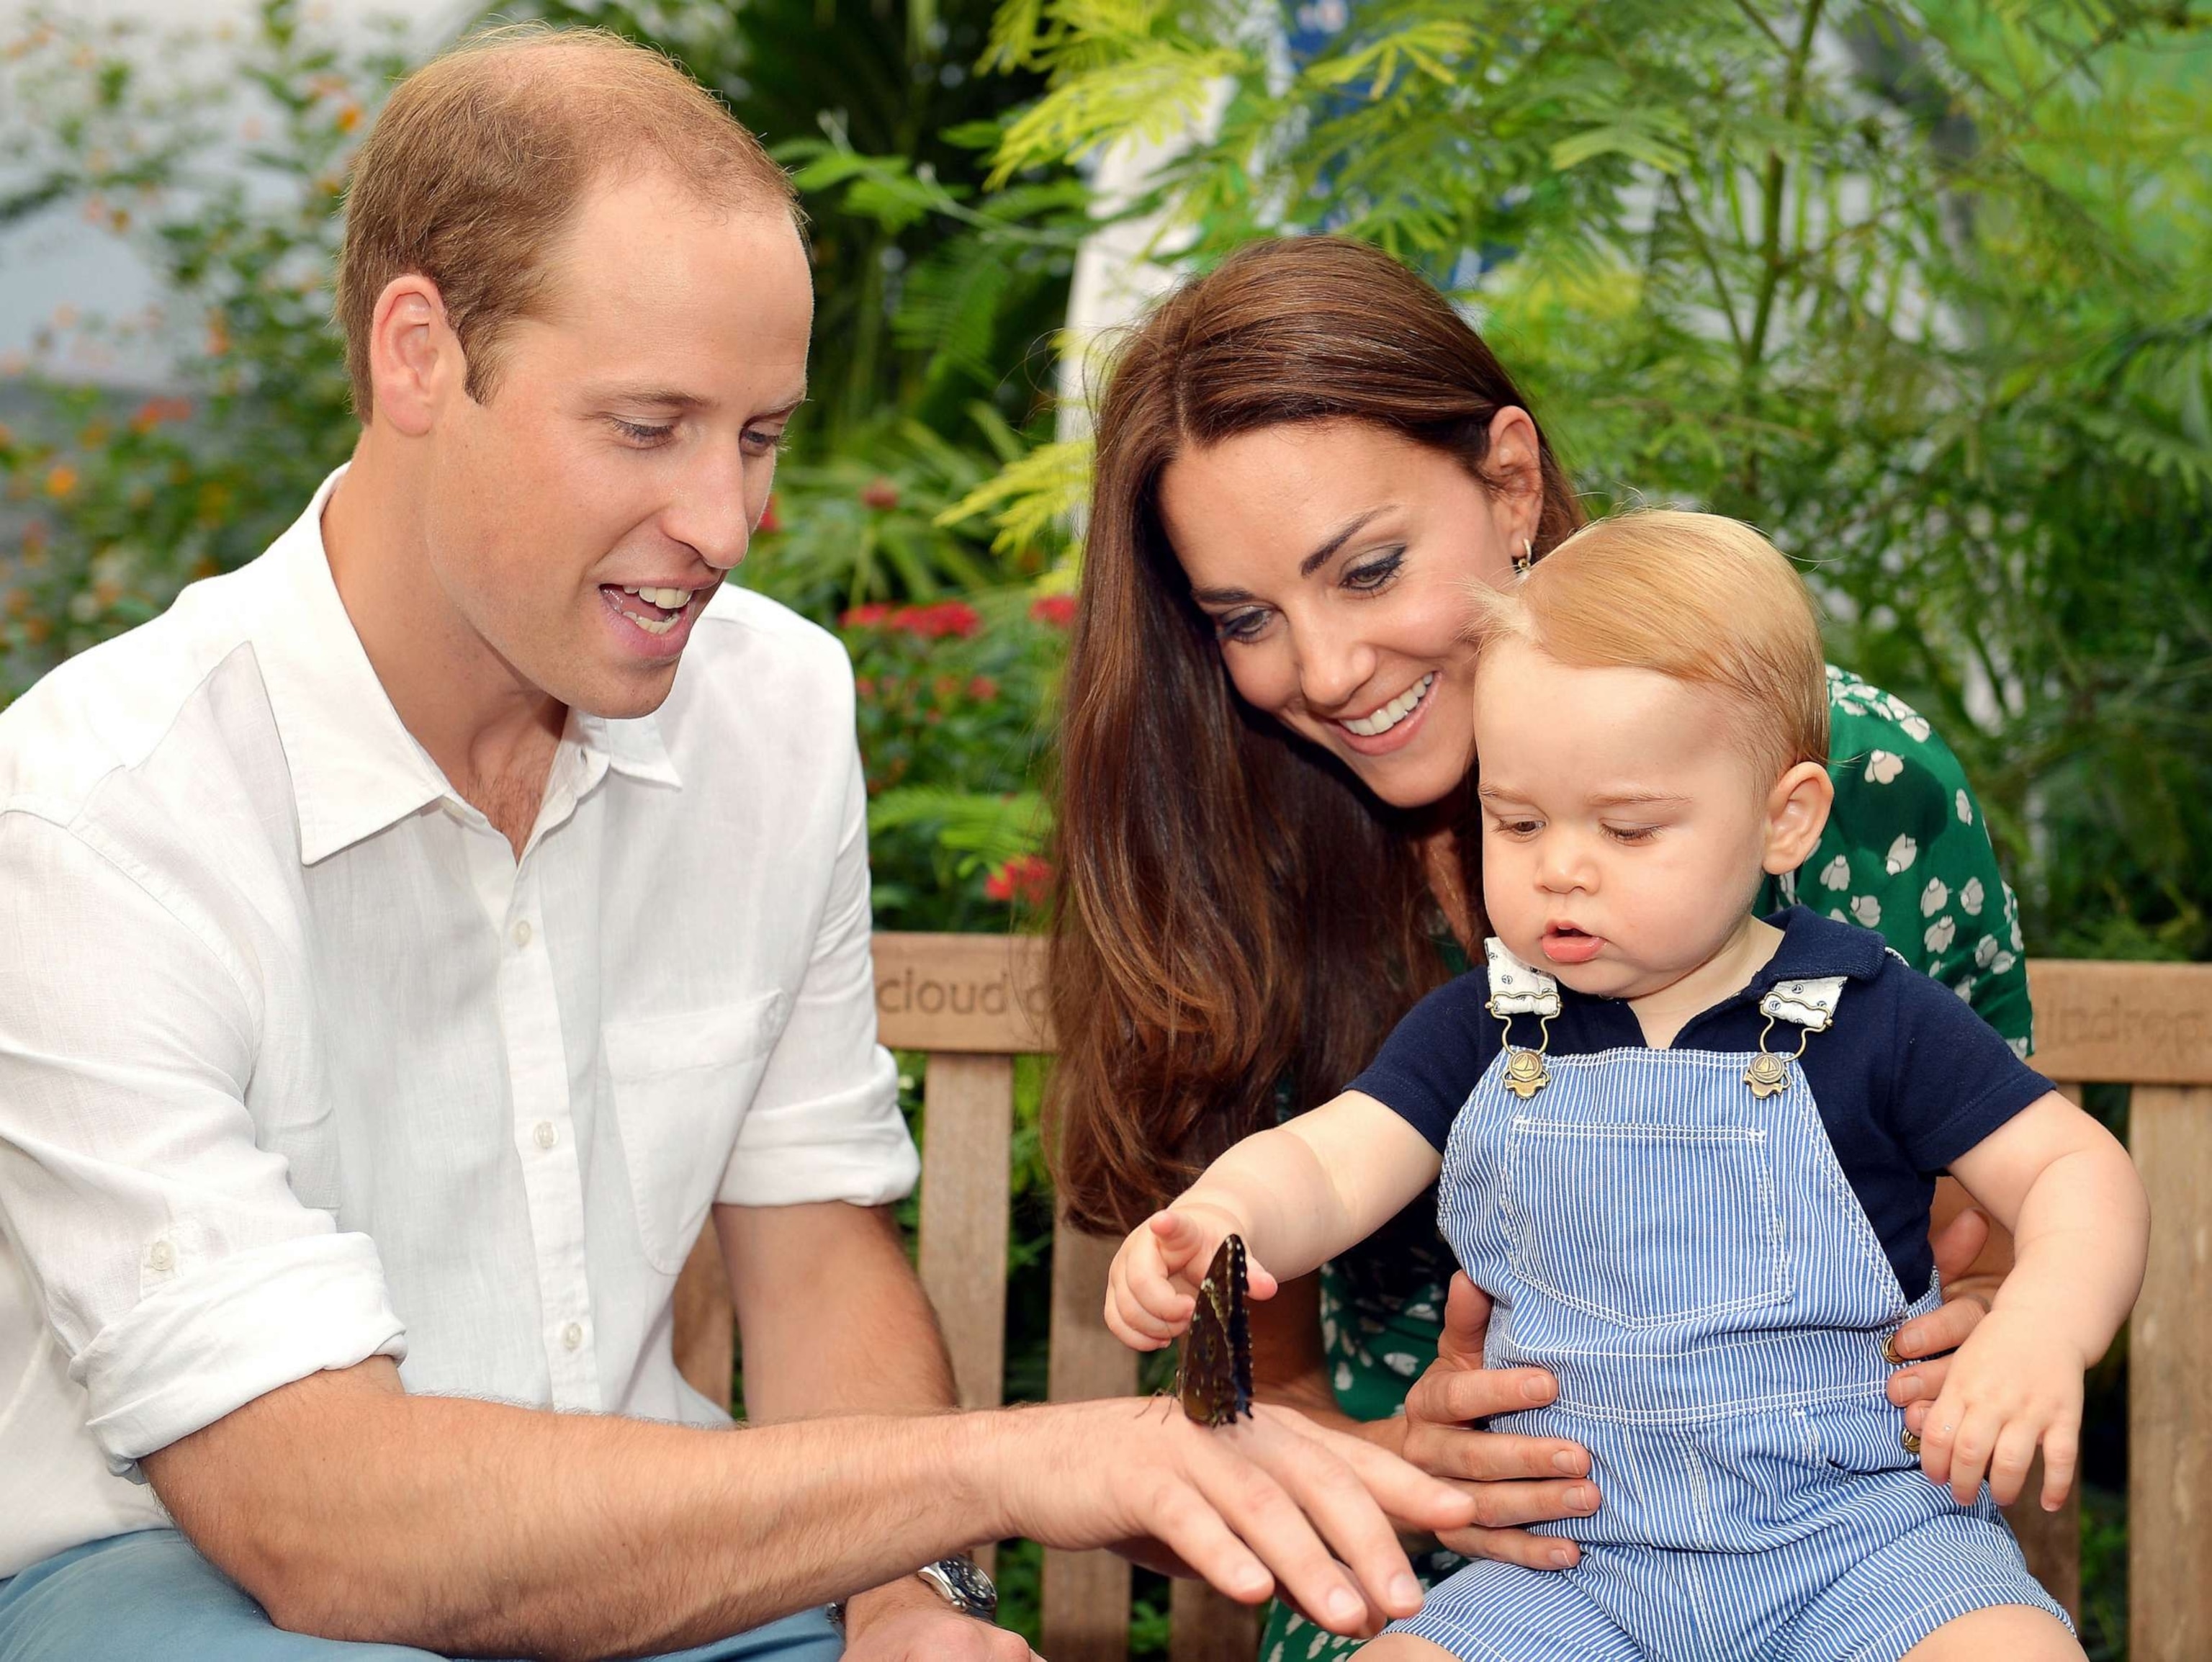 PHOTO: In this July 2, 2014, file photo, Prince William and Catherine, Duchess of Cambridge sit with Prince George during a visit to the Sensational Butterflies exhibition at the Natural History Museum in London.